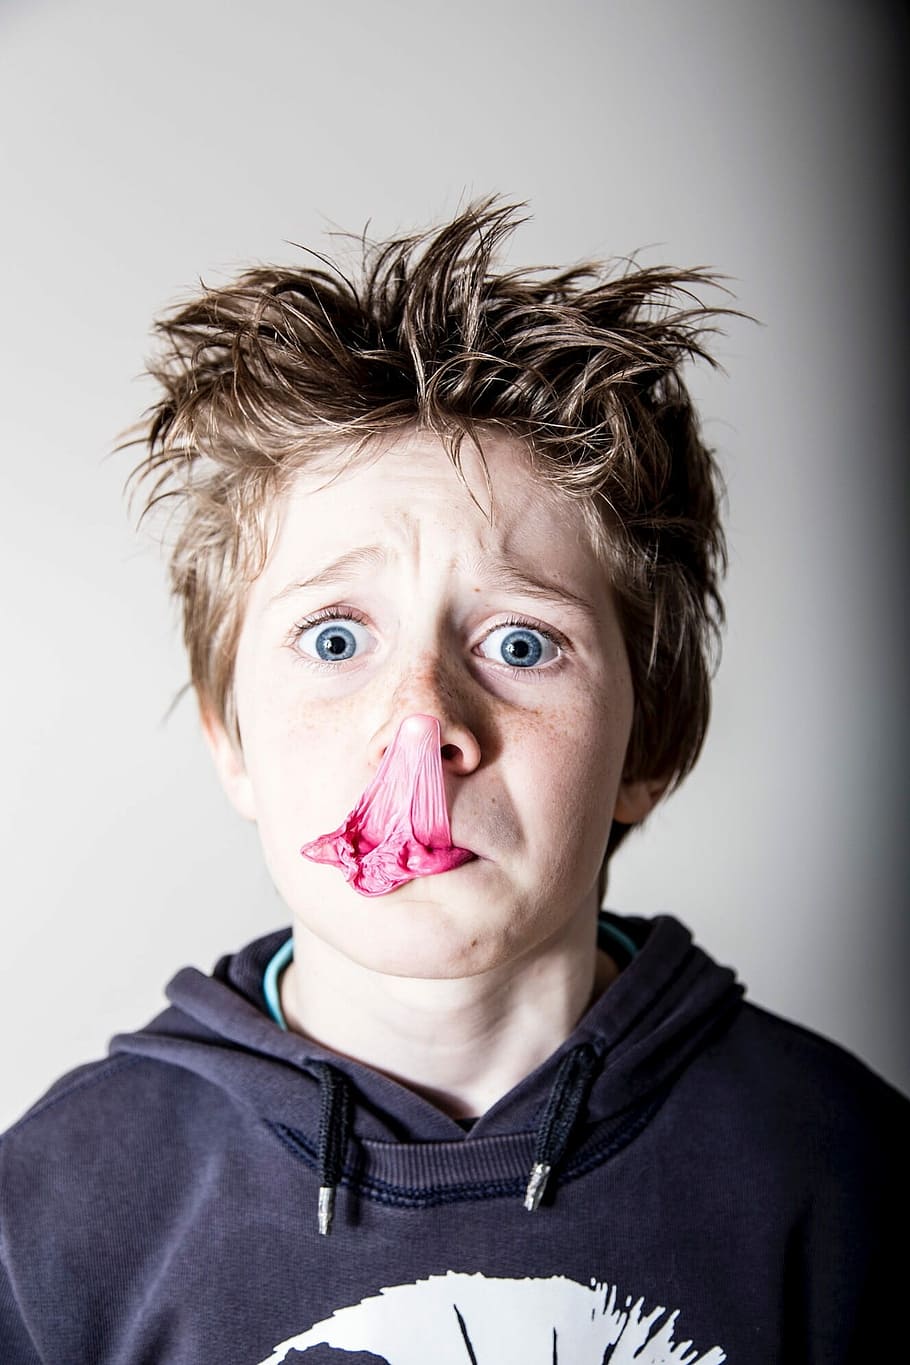 Chewing Gum, Ouch, Sugar, boy, portrait, looking at camera, human body part, child, humor, headshot